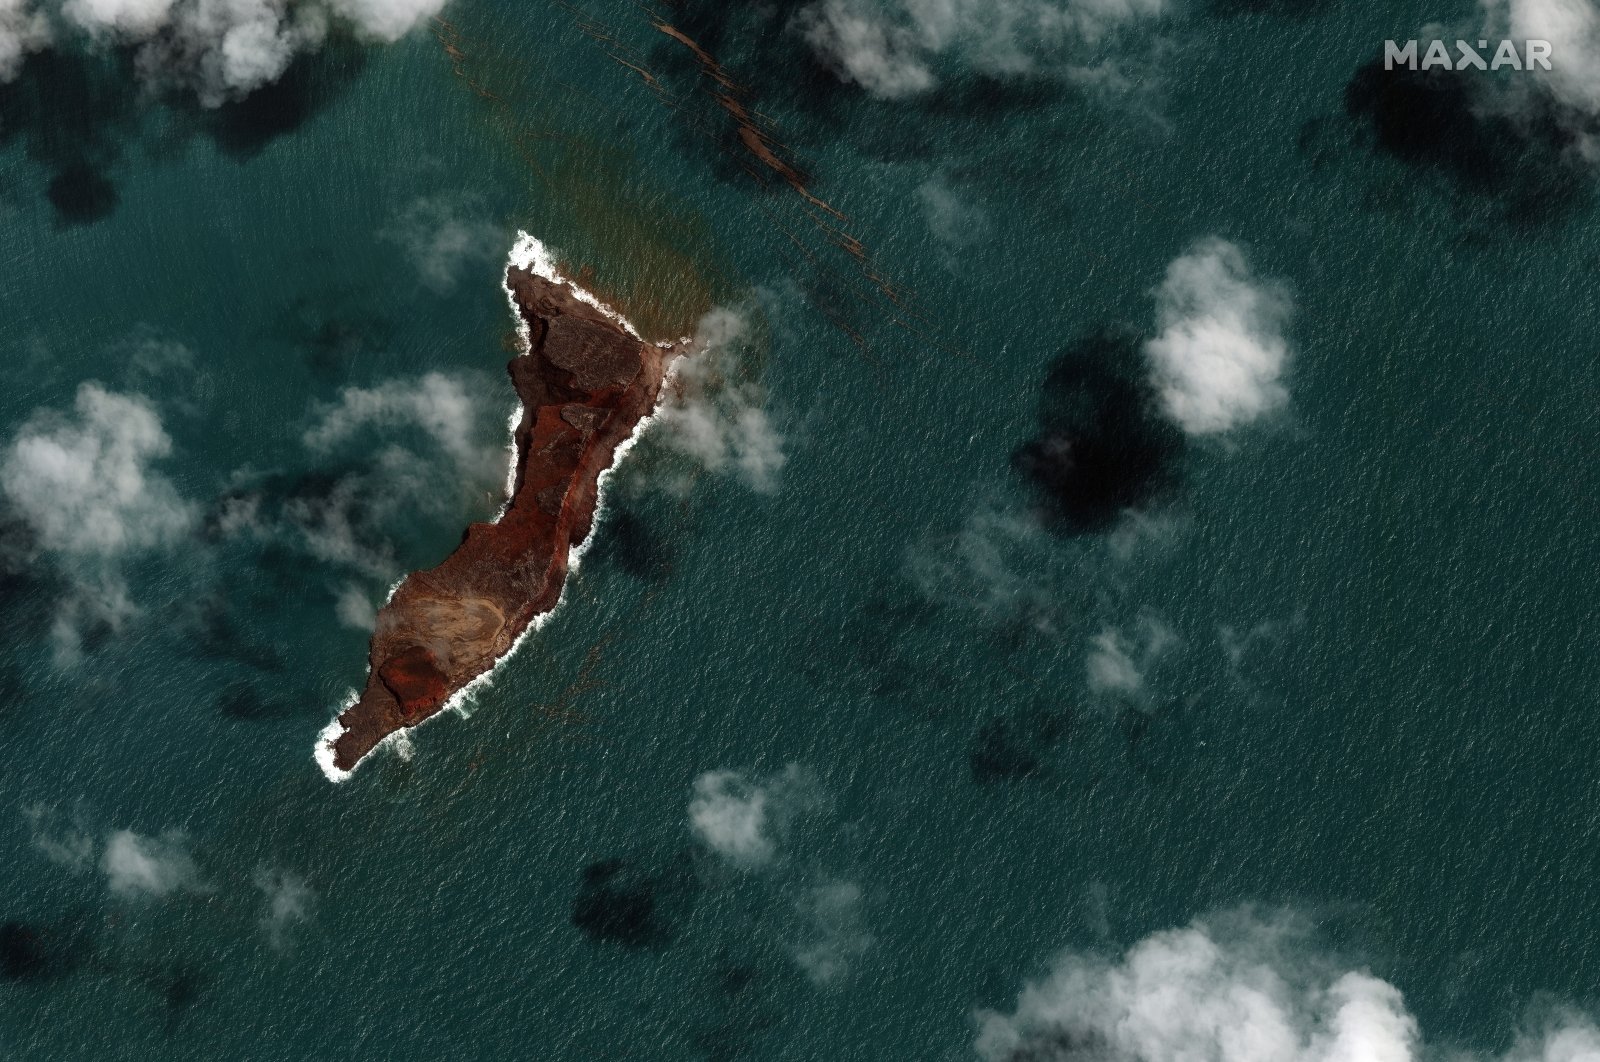 This satellite image by Maxar Technologies shows a view of Hunga Tonga Hunga Ha’apai volcano in Tonga, Jan. 18, 2022 after a huge undersea volcanic eruption. (AP Photo)